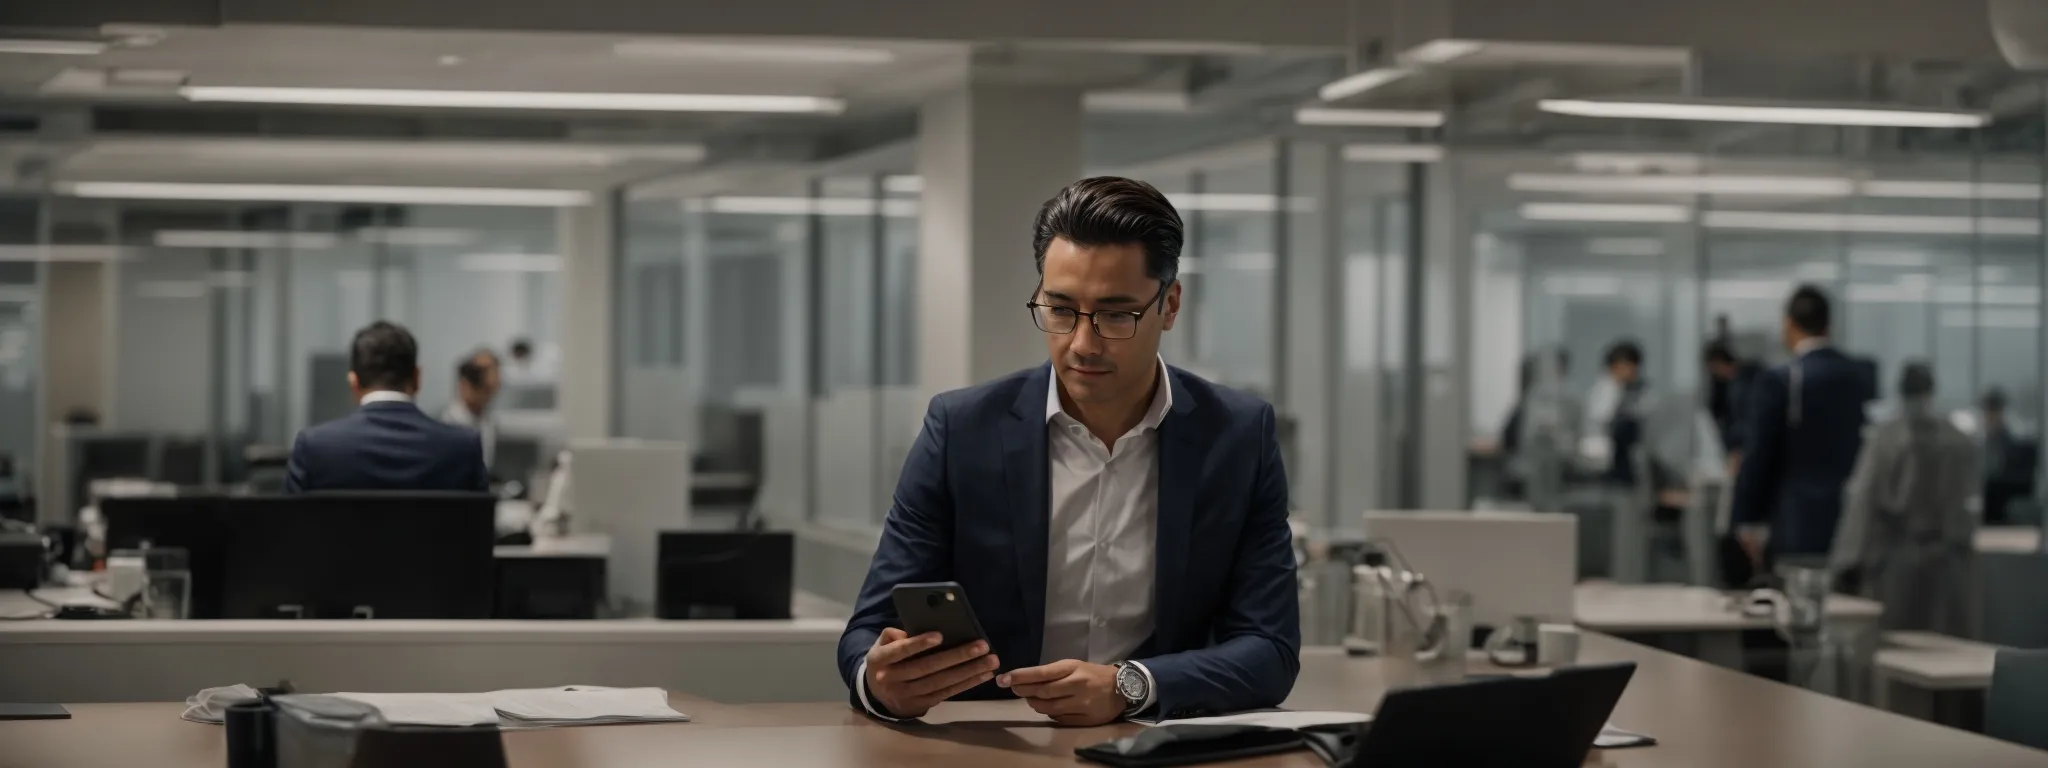 an attorney attentively checking a smartphone for client reviews amidst a well-organized, modern office.